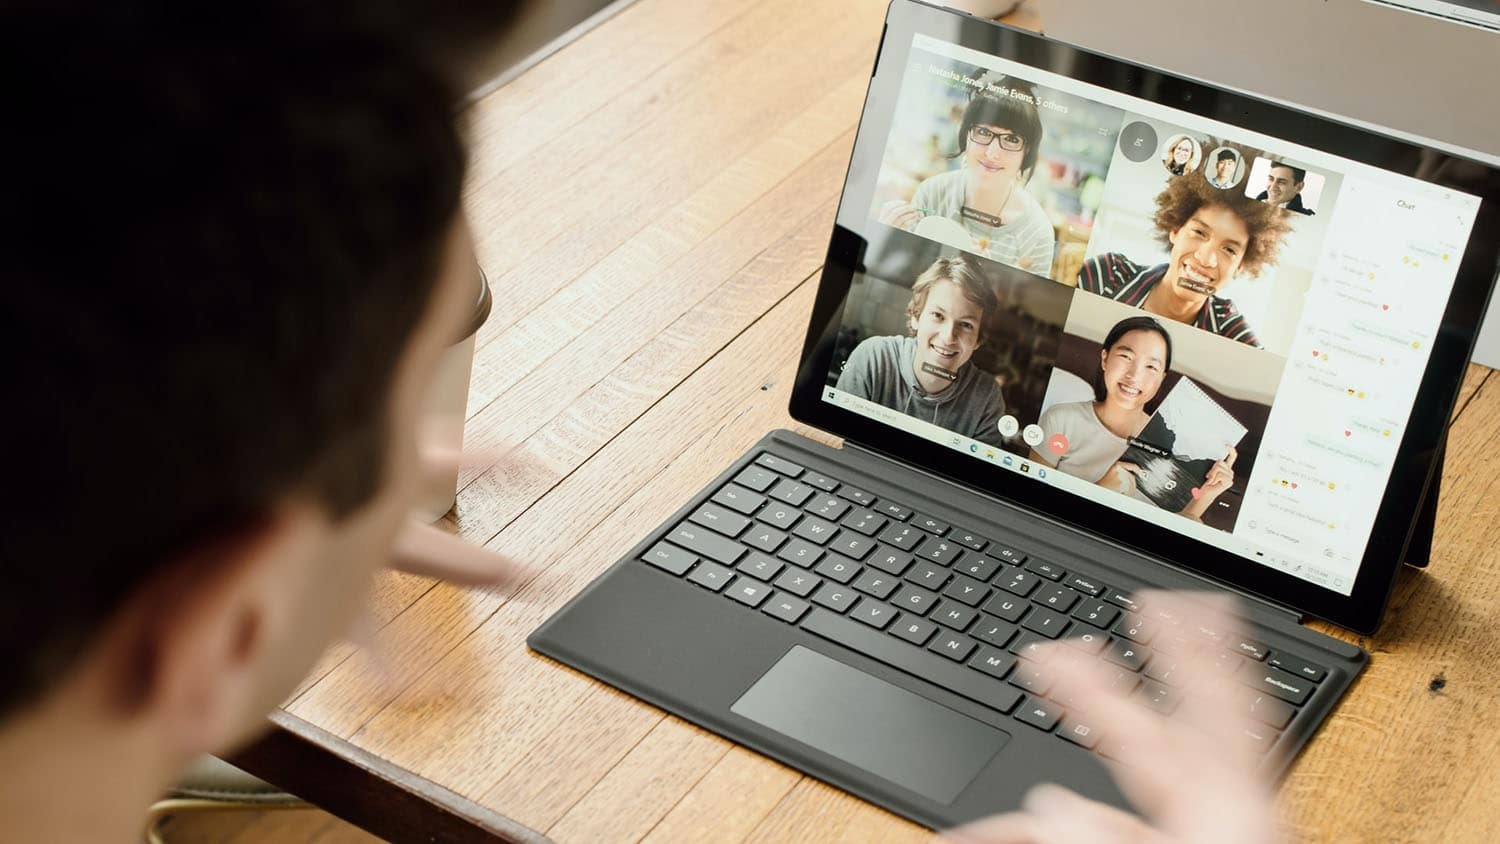 a person is engaged in a video conference with several other people who are pictured on the screen of a laptop